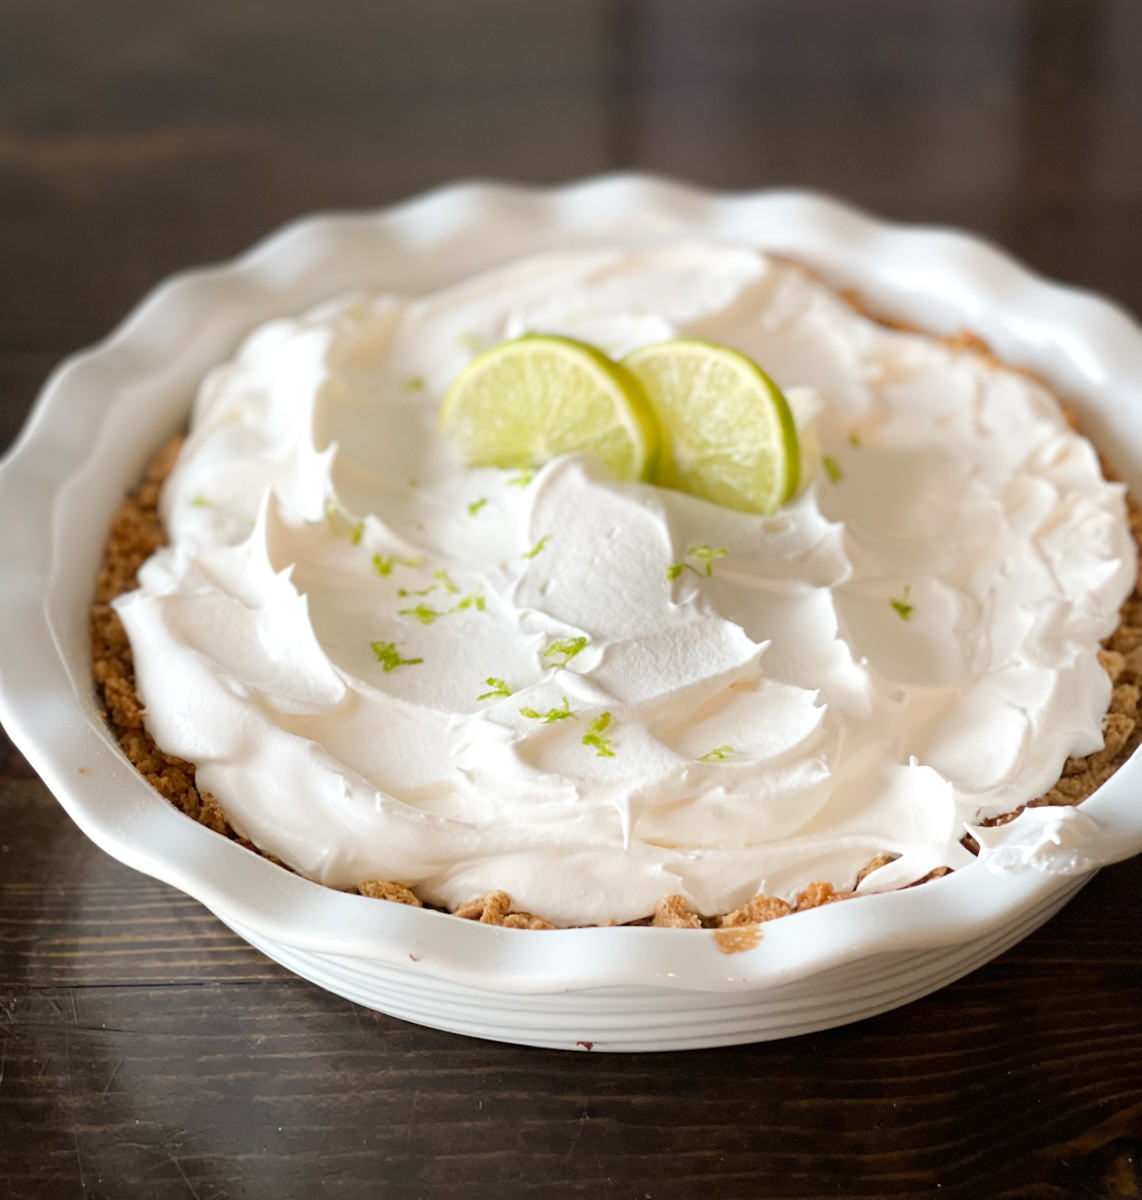 whole key lime pie garnished with lime slices